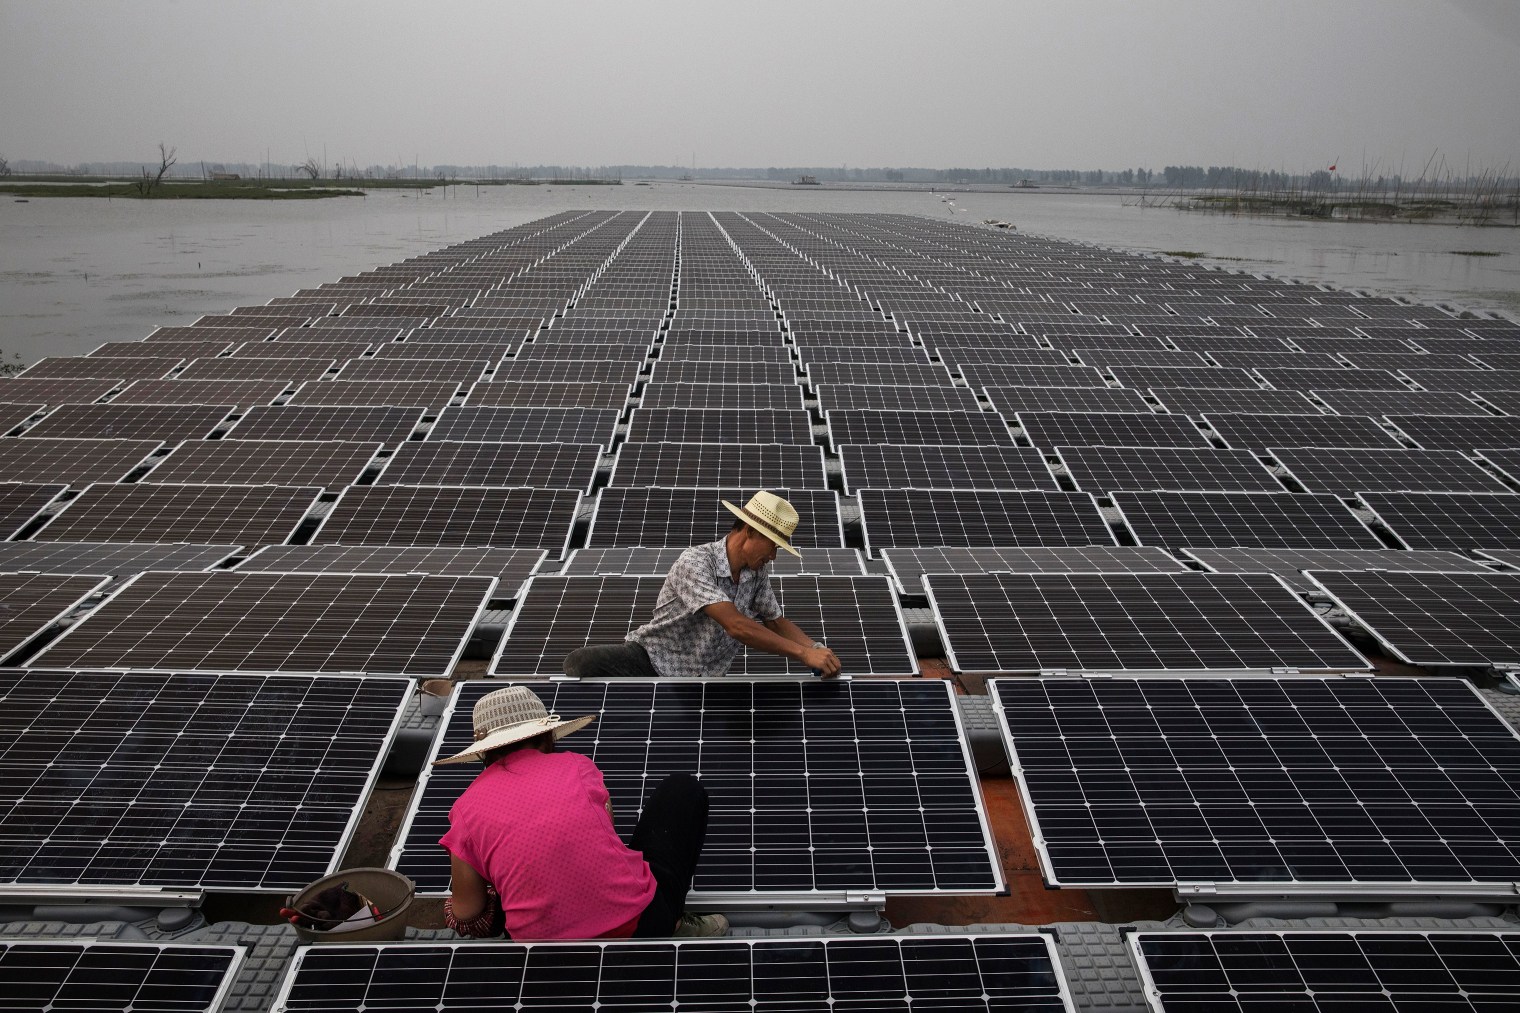 Workers prepare panels that will be part of a large floating solar farm project.